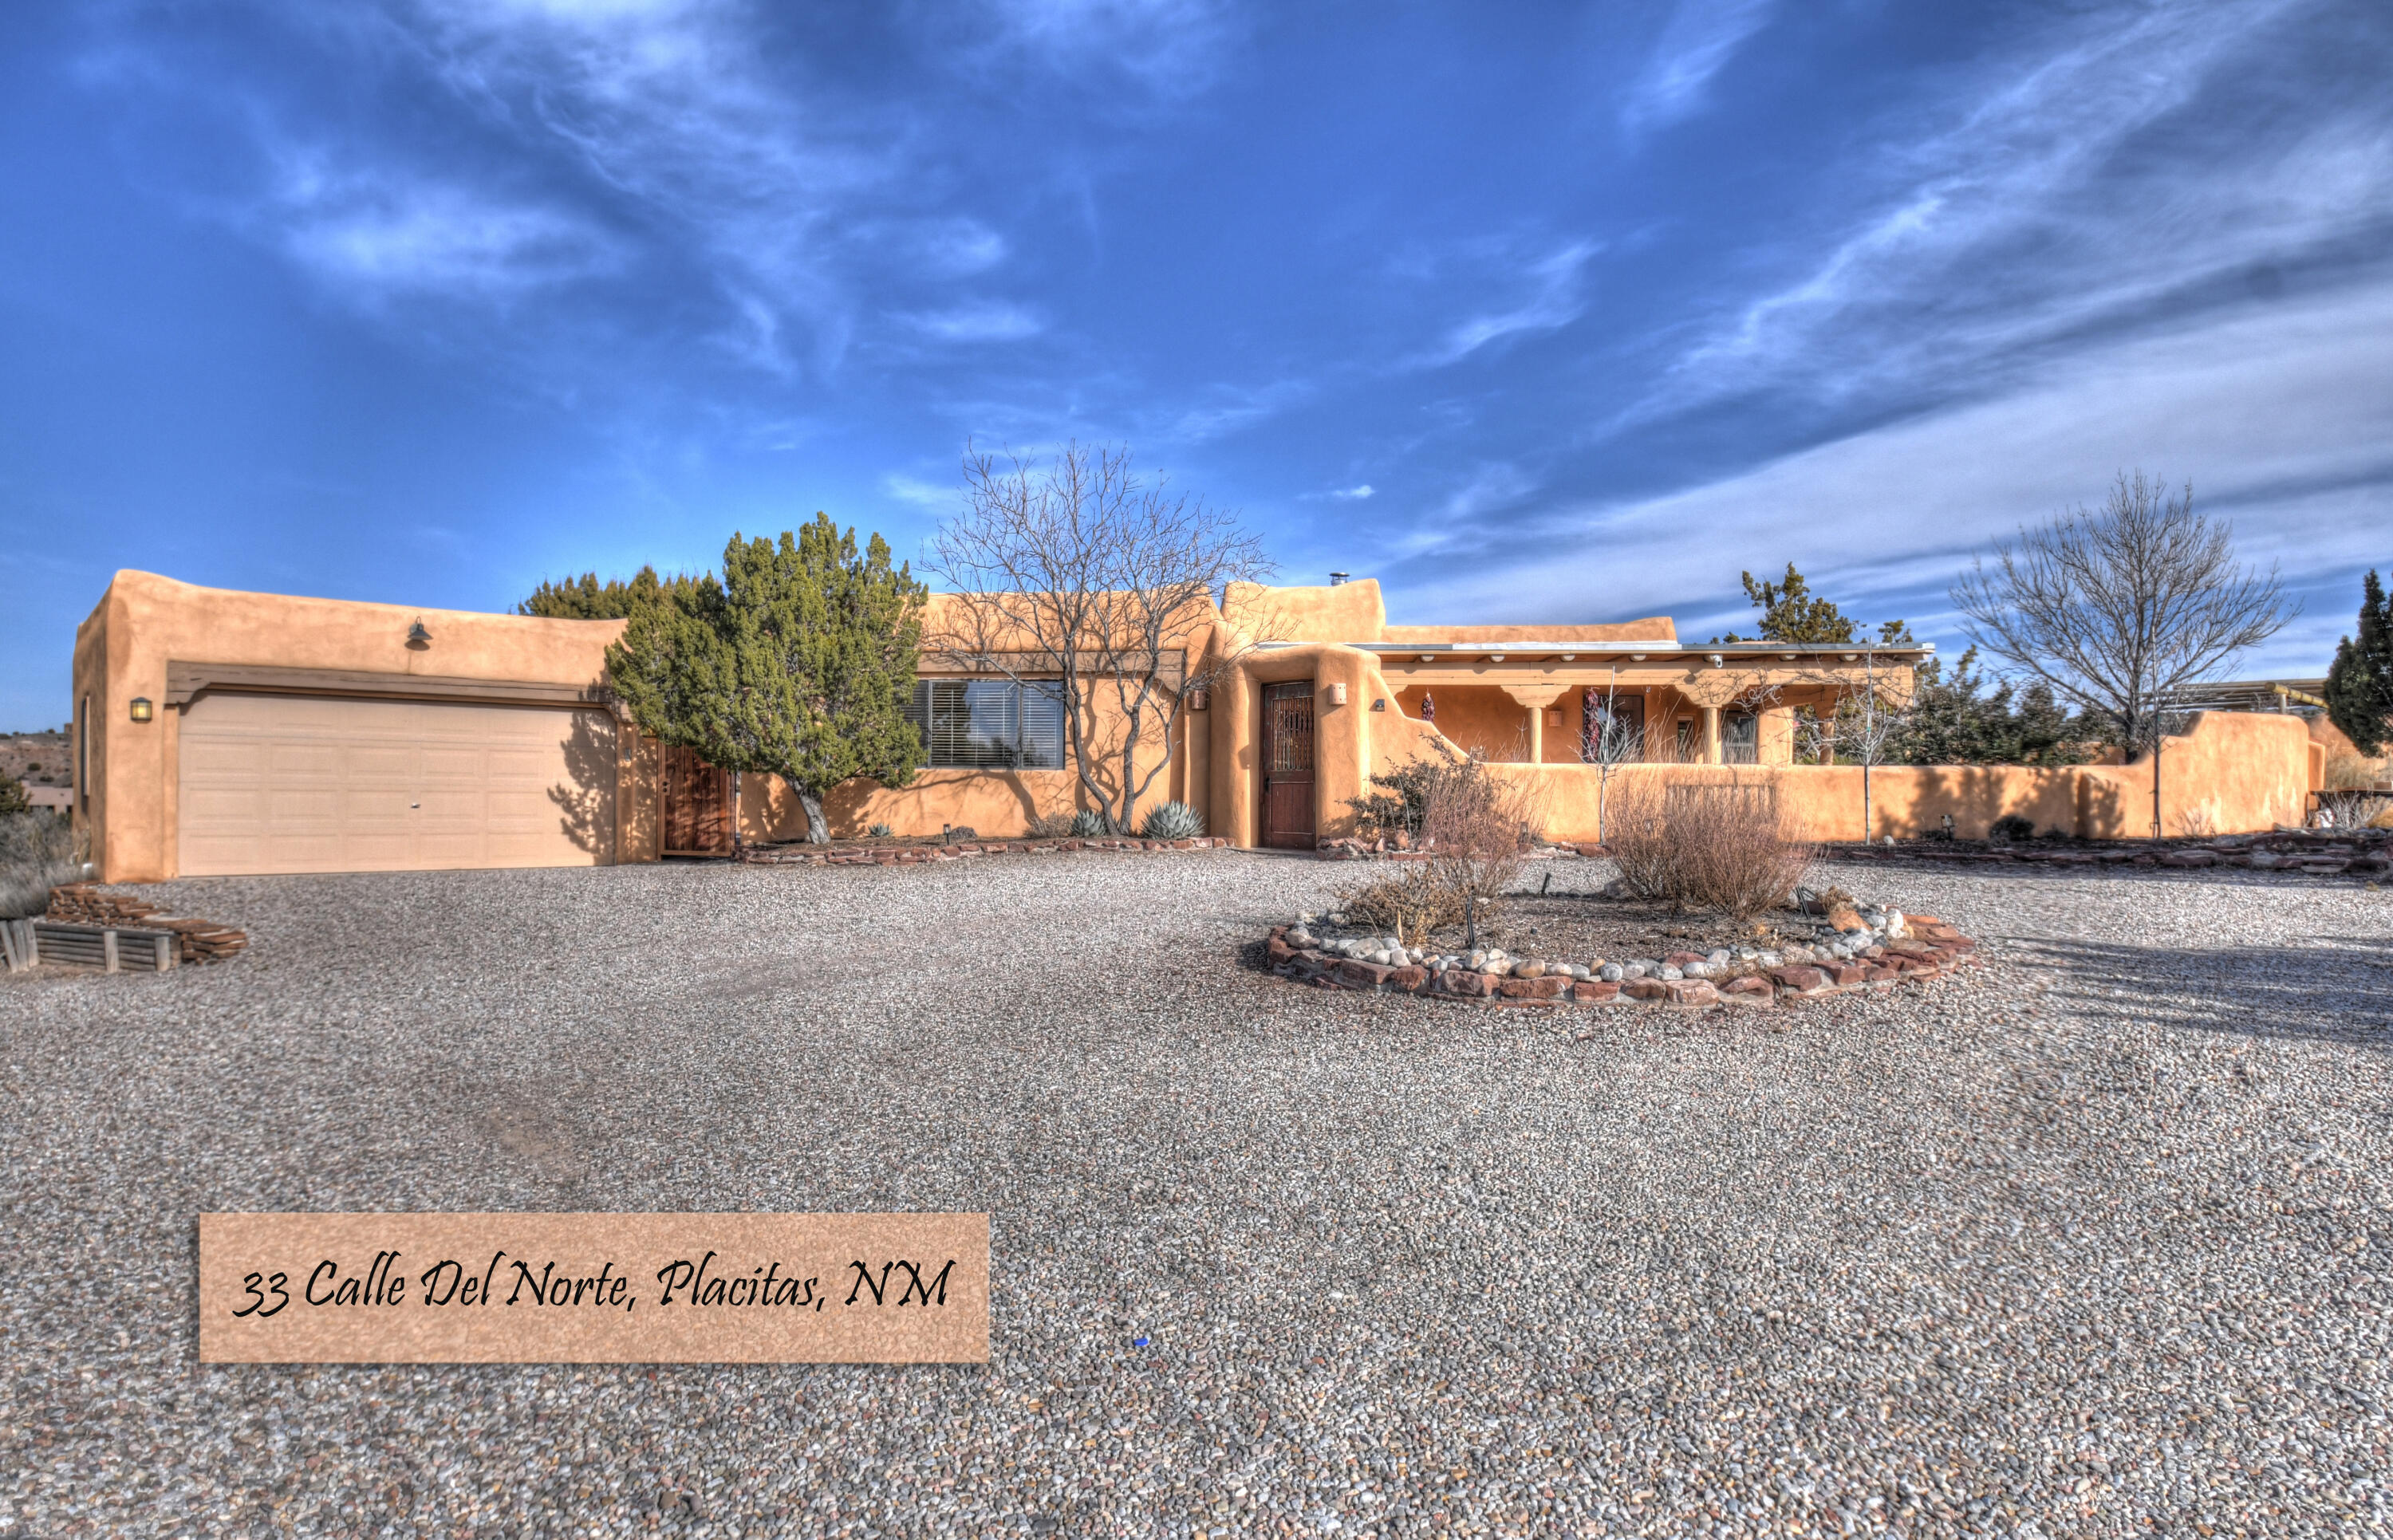 This stunning luxury southwestern home takes advantage of the incredible vistas afforded from this private and beautiful homesite.  This home is a 2 possible 3 bedroom with a 2 bedroom guest house.  Jotul Wood Burning The views are captivating.  Relax poolside in your private lap pool overlooking the dramatic landscape that includes two coy ponds as well as two covered patios including an outside Kiva fireplace. This single story floor plan offers a butlers pantry with a sub-zero wine cooler.  The laundry room also includes a workspace for your hobbies.  There is a mud room at the back entry.  28 owned solar panels provide  energy, making it almost totally off-the-grid.  Enjoy the dramatic night skies, beautiful sunsets and incredible views of the high desert landscape from this great home